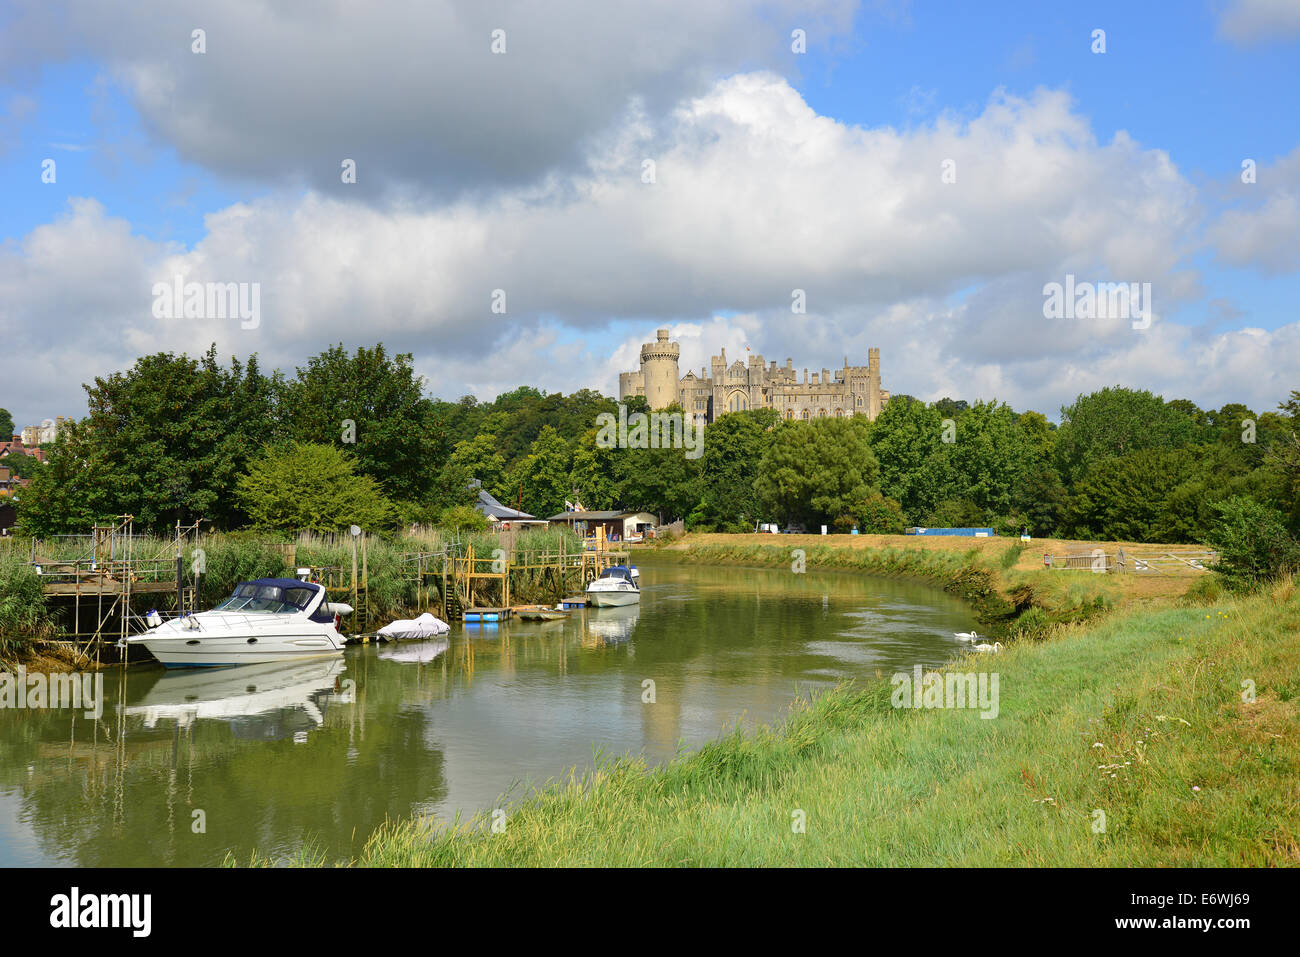 View of Arundel Castle and town from bank of River Arun, Arundel, West Sussex, England, United Kingdom Stock Photo